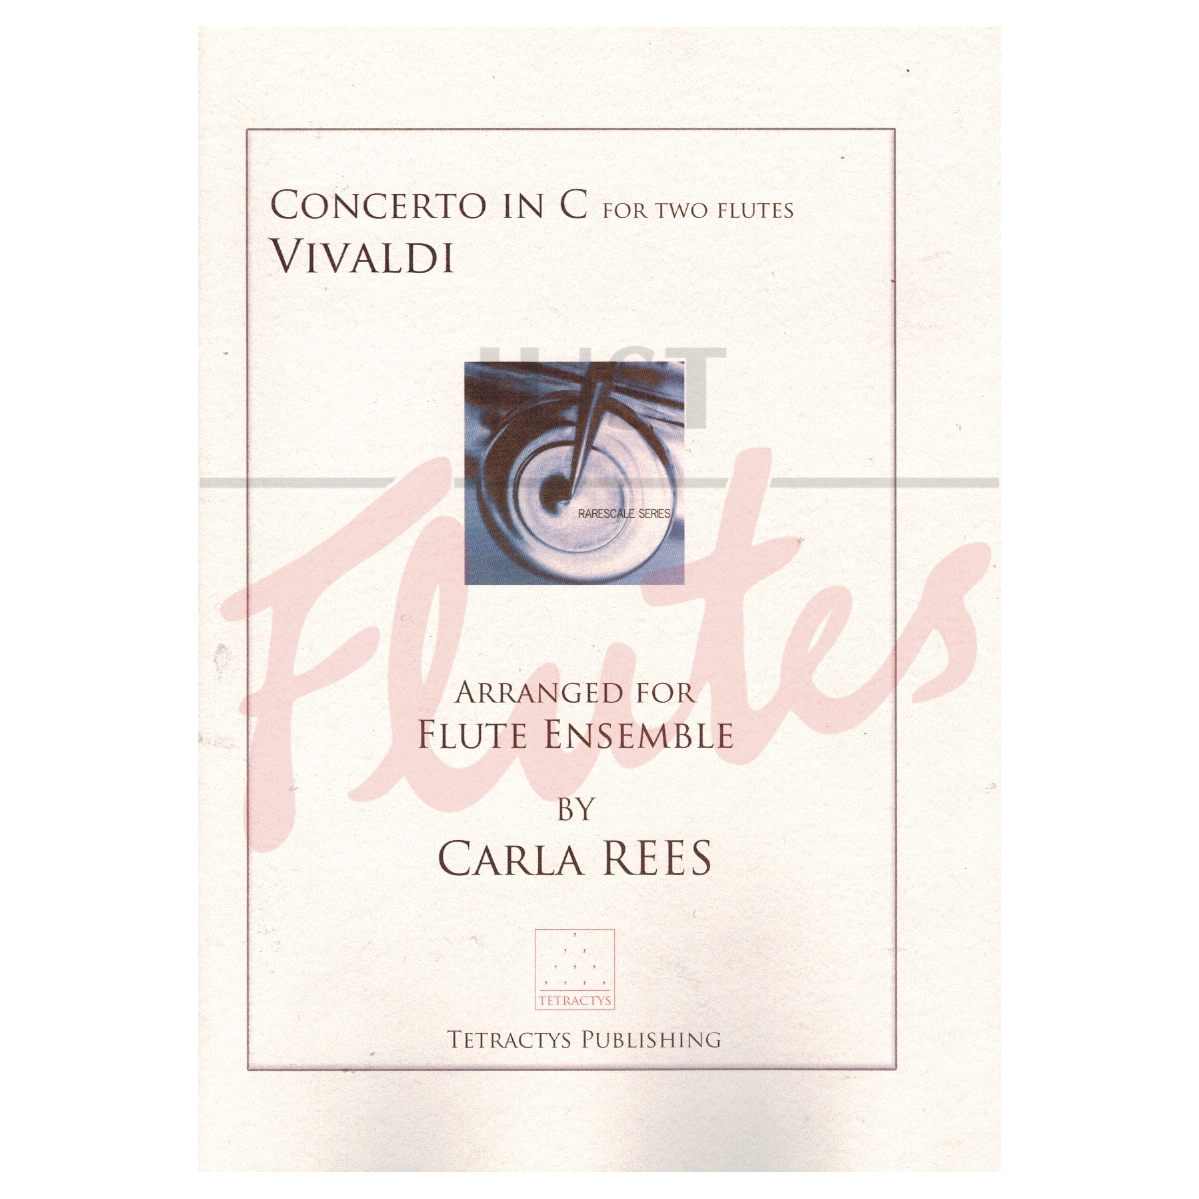 Concerto in C Major for Two Flutes and Ensemble